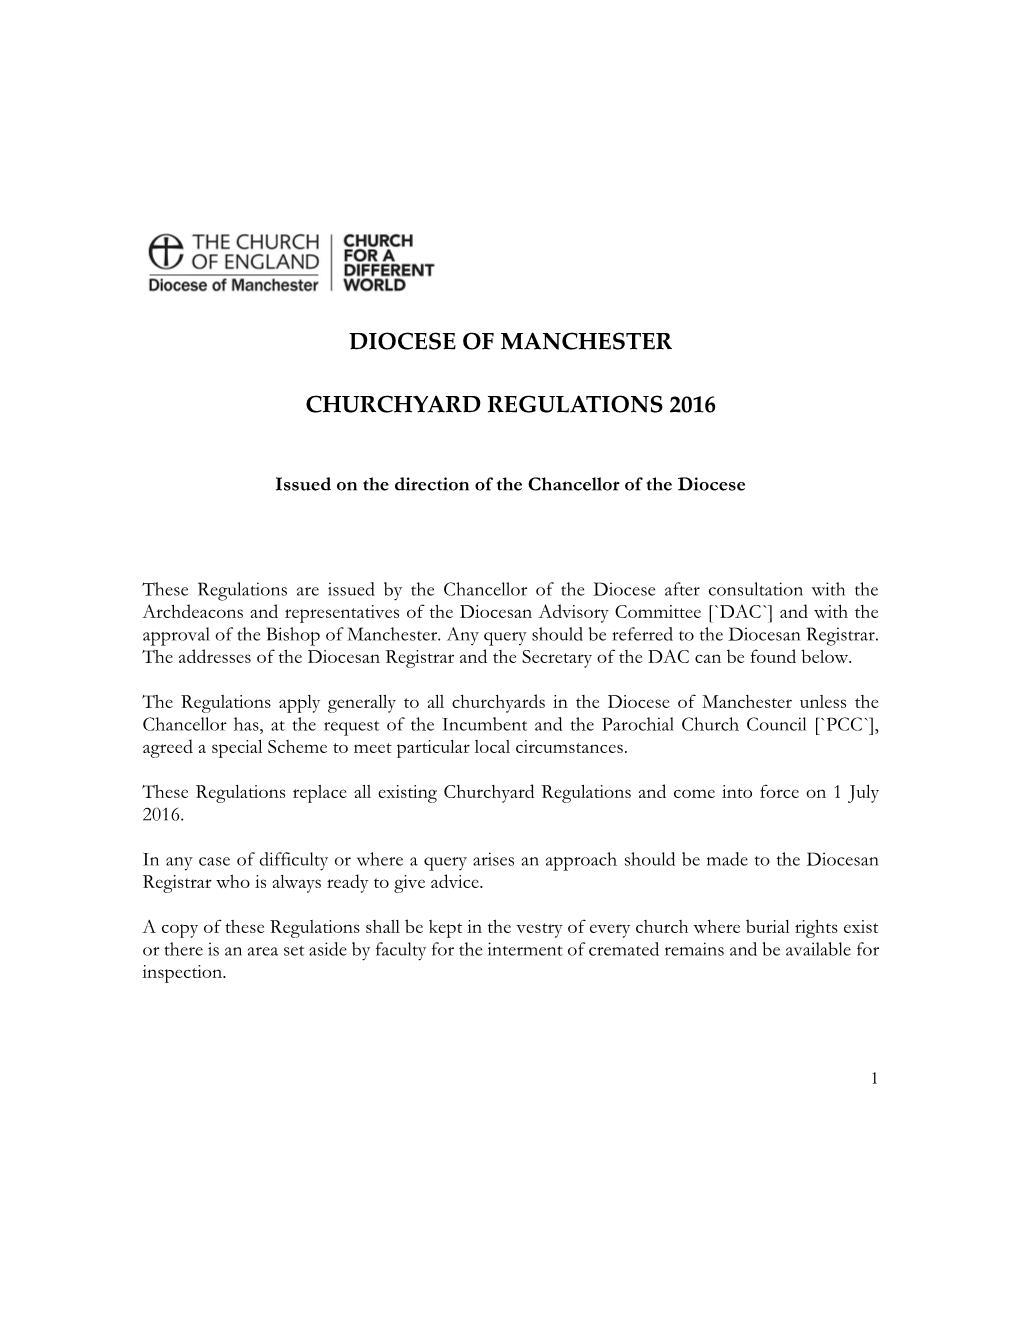 Diocese of Manchester Churchyard Regulations